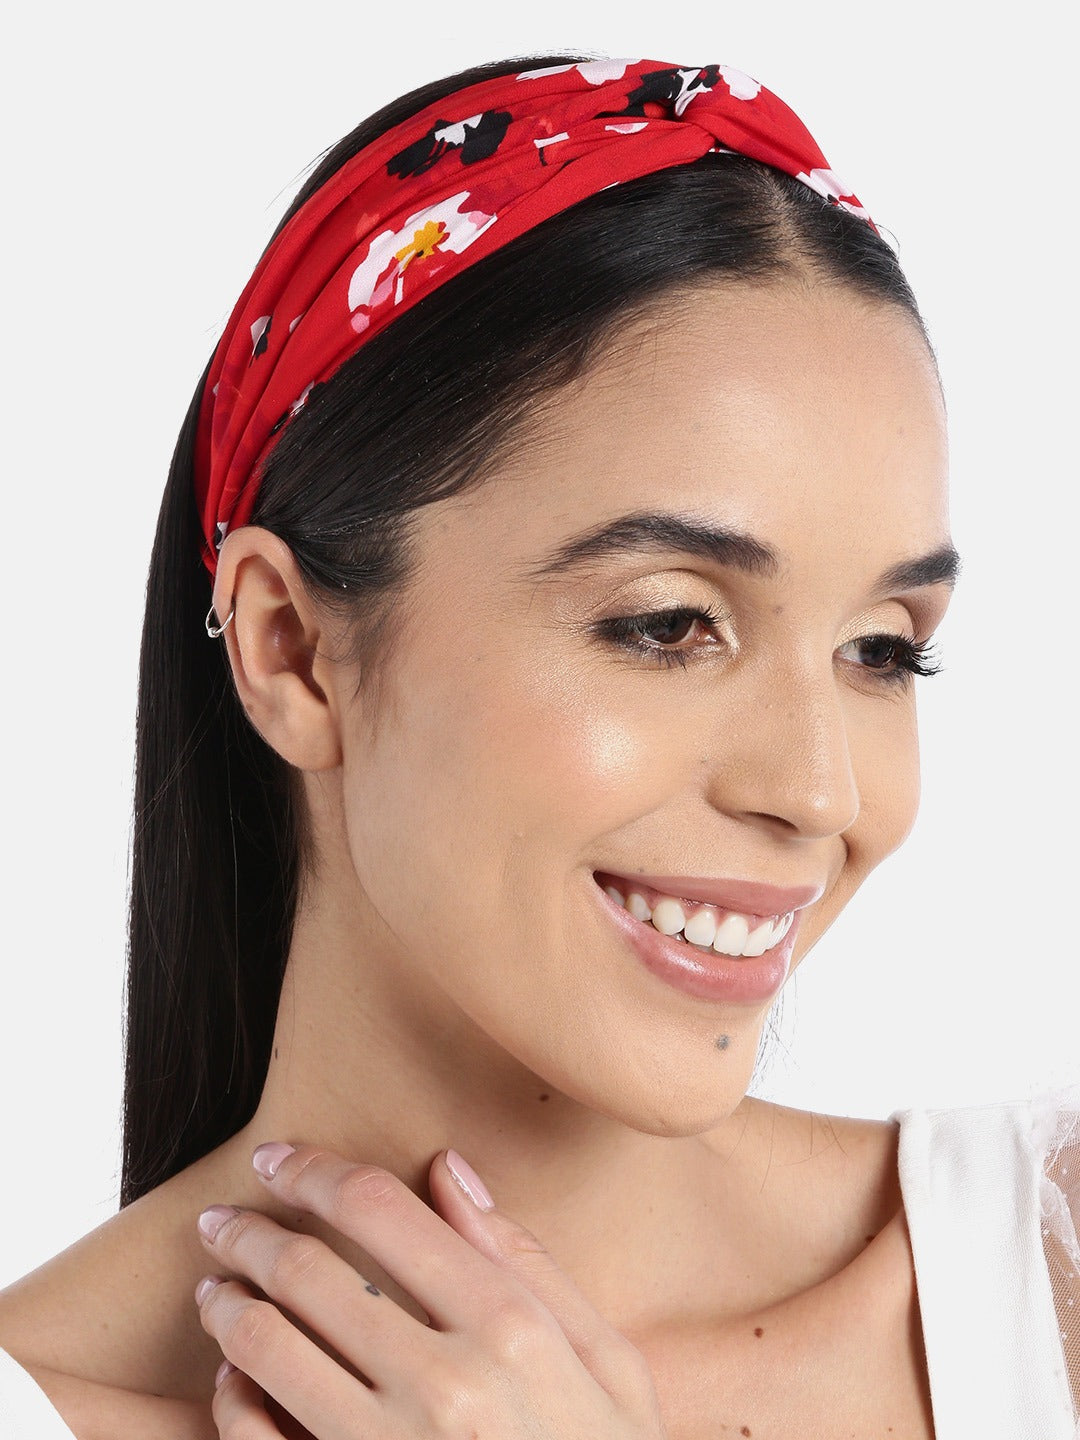 Blueberry multi floral printed red hairband